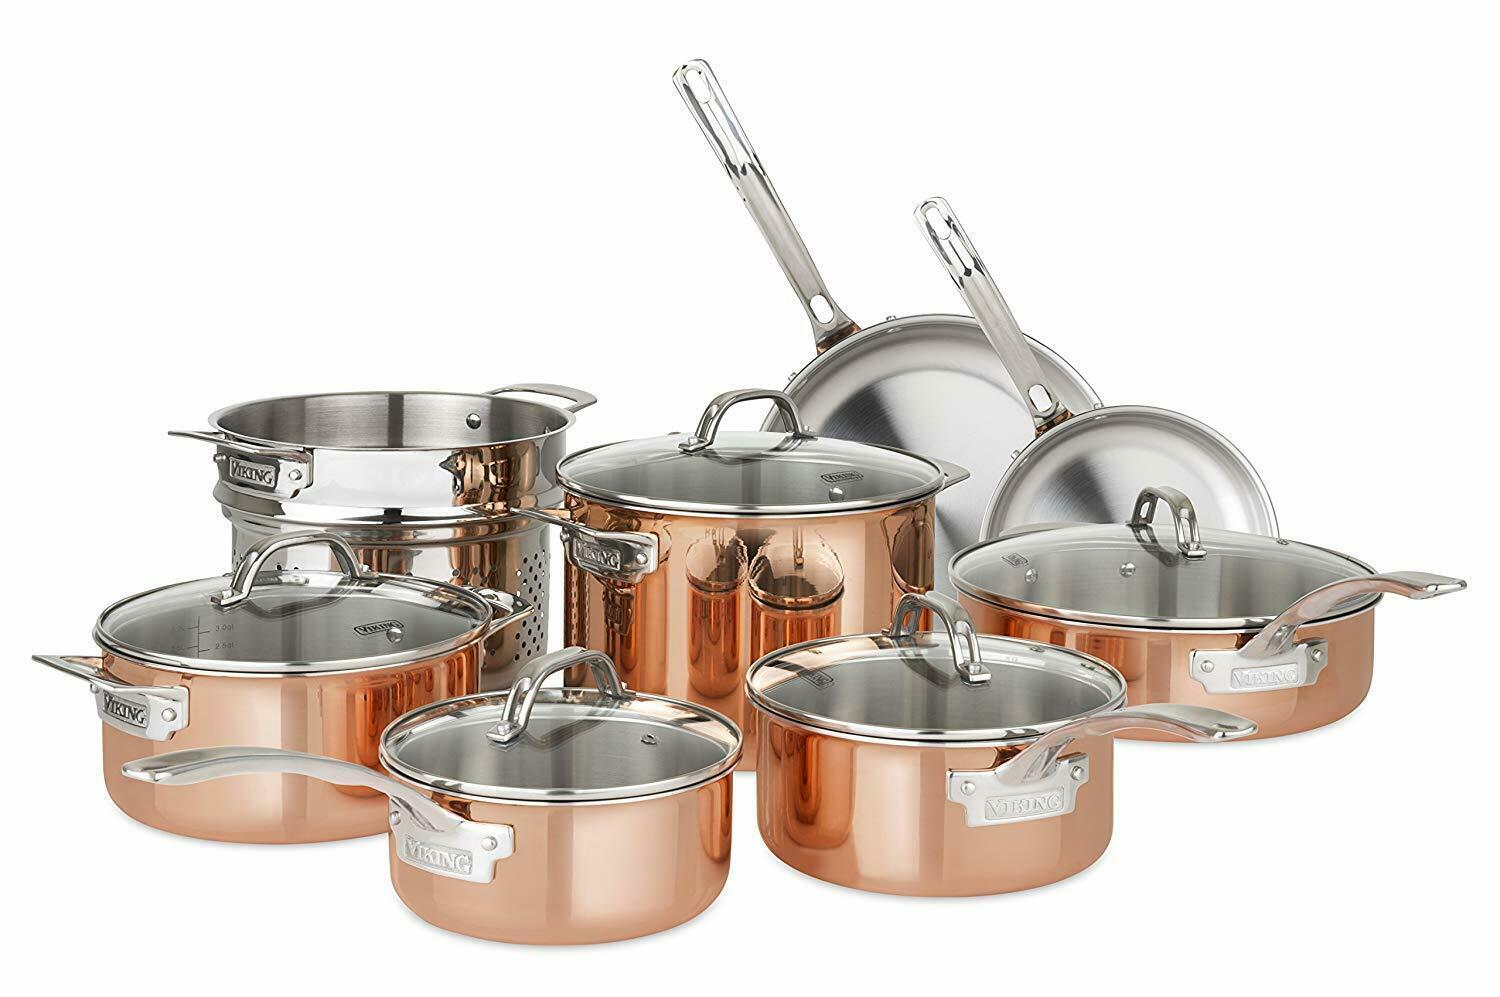 13-Piece Viking Culinary Copper Stainless Steel Cookware Set for $160.65 Shipped